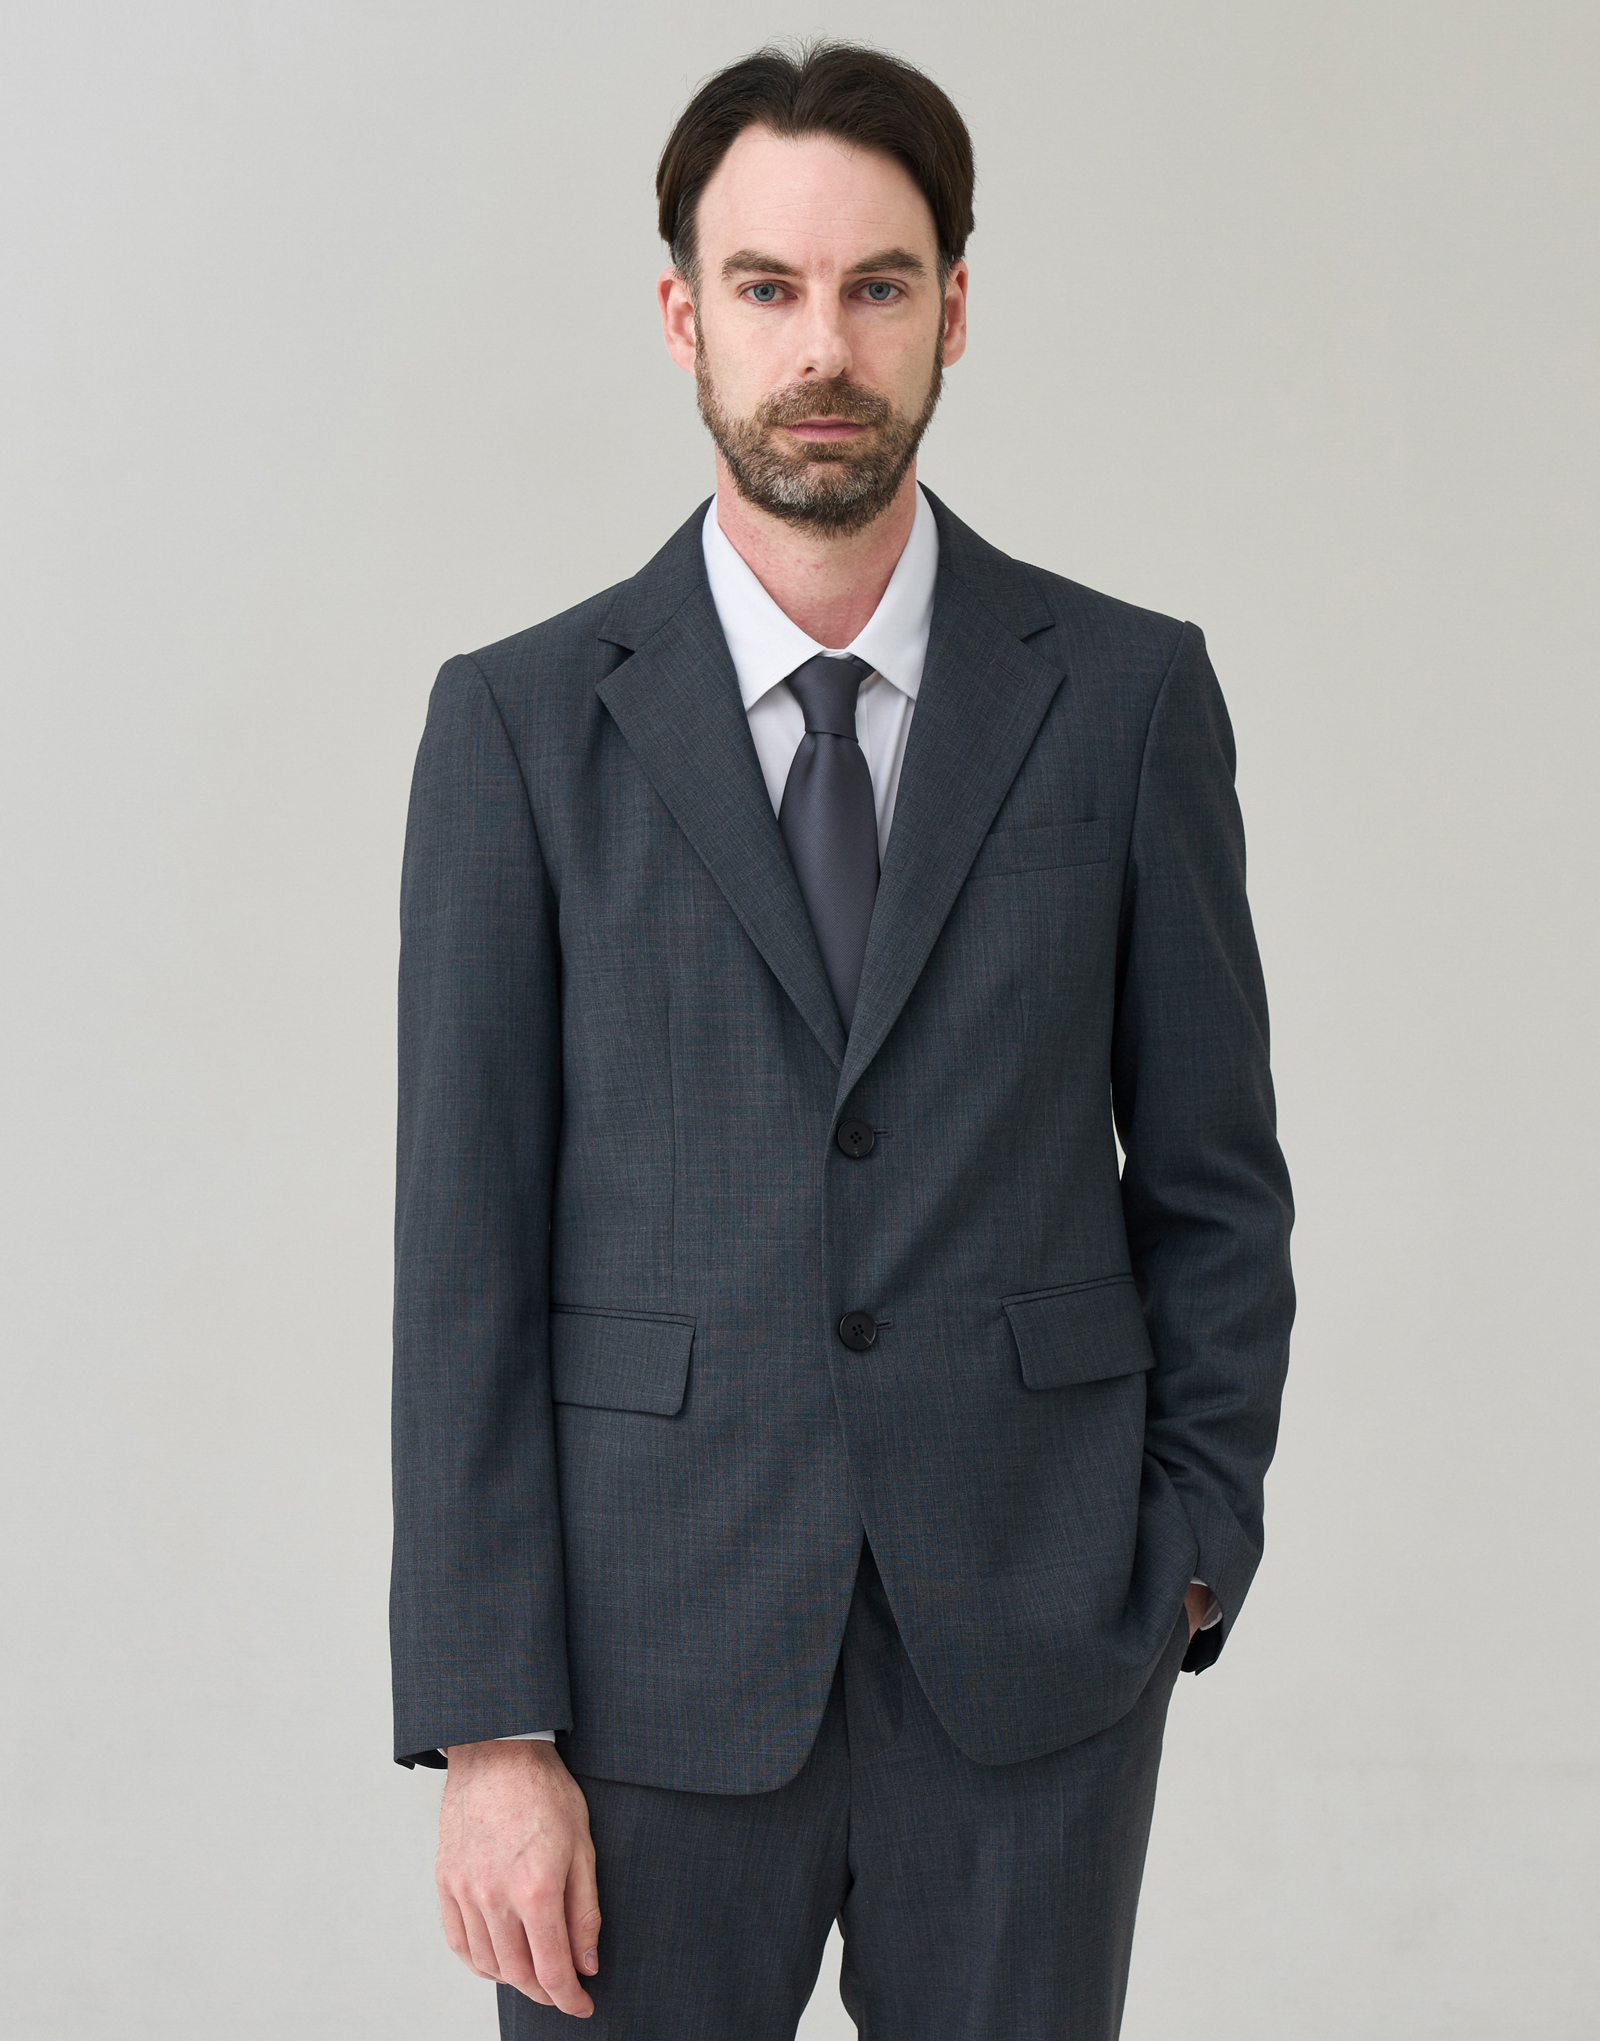 Tailored suit single jacket #AD2028 Gray